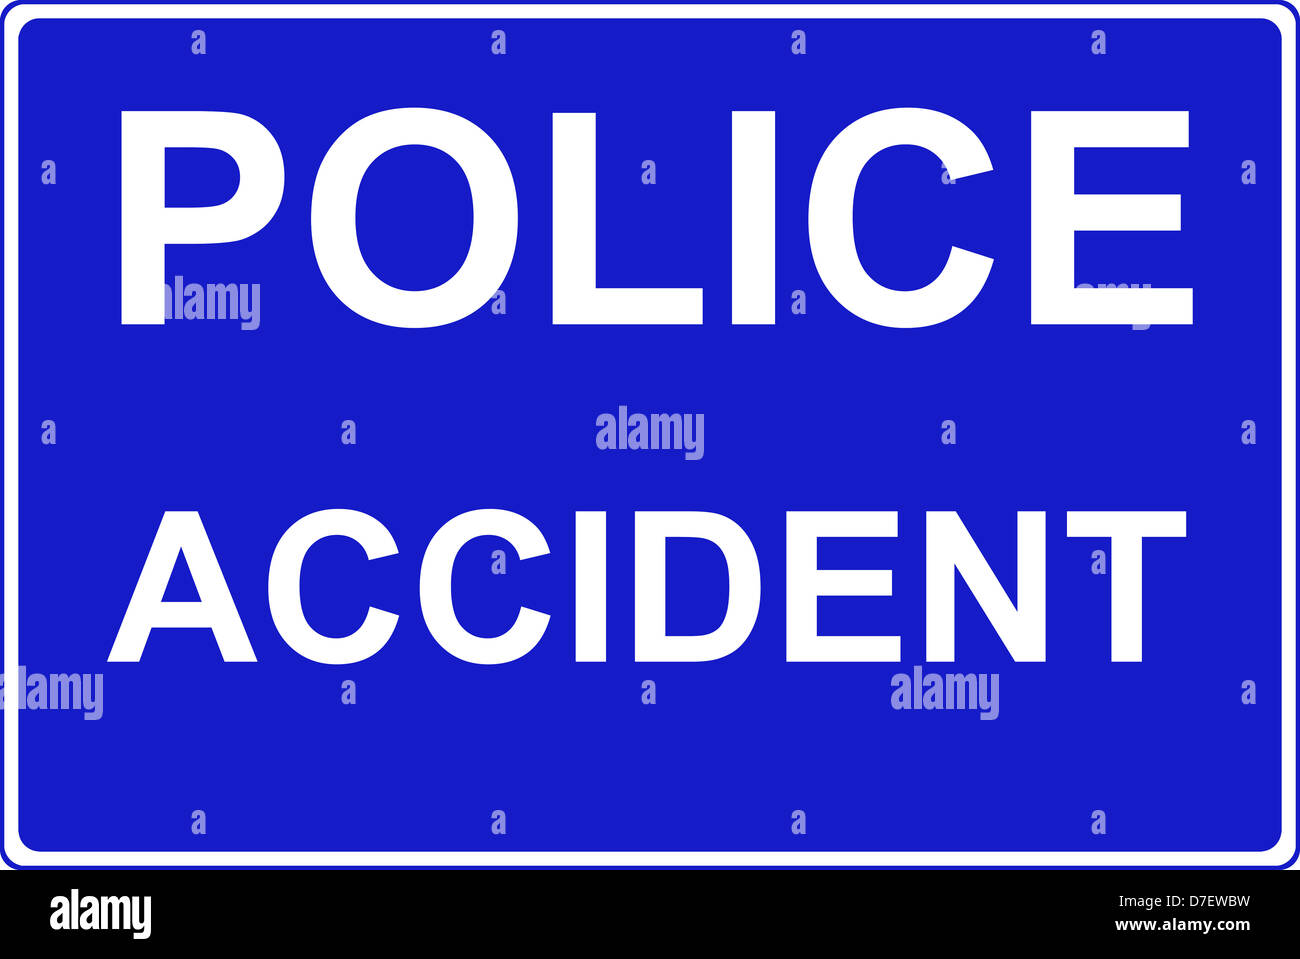 Police accident on the motorway traffic sign Stock Photo